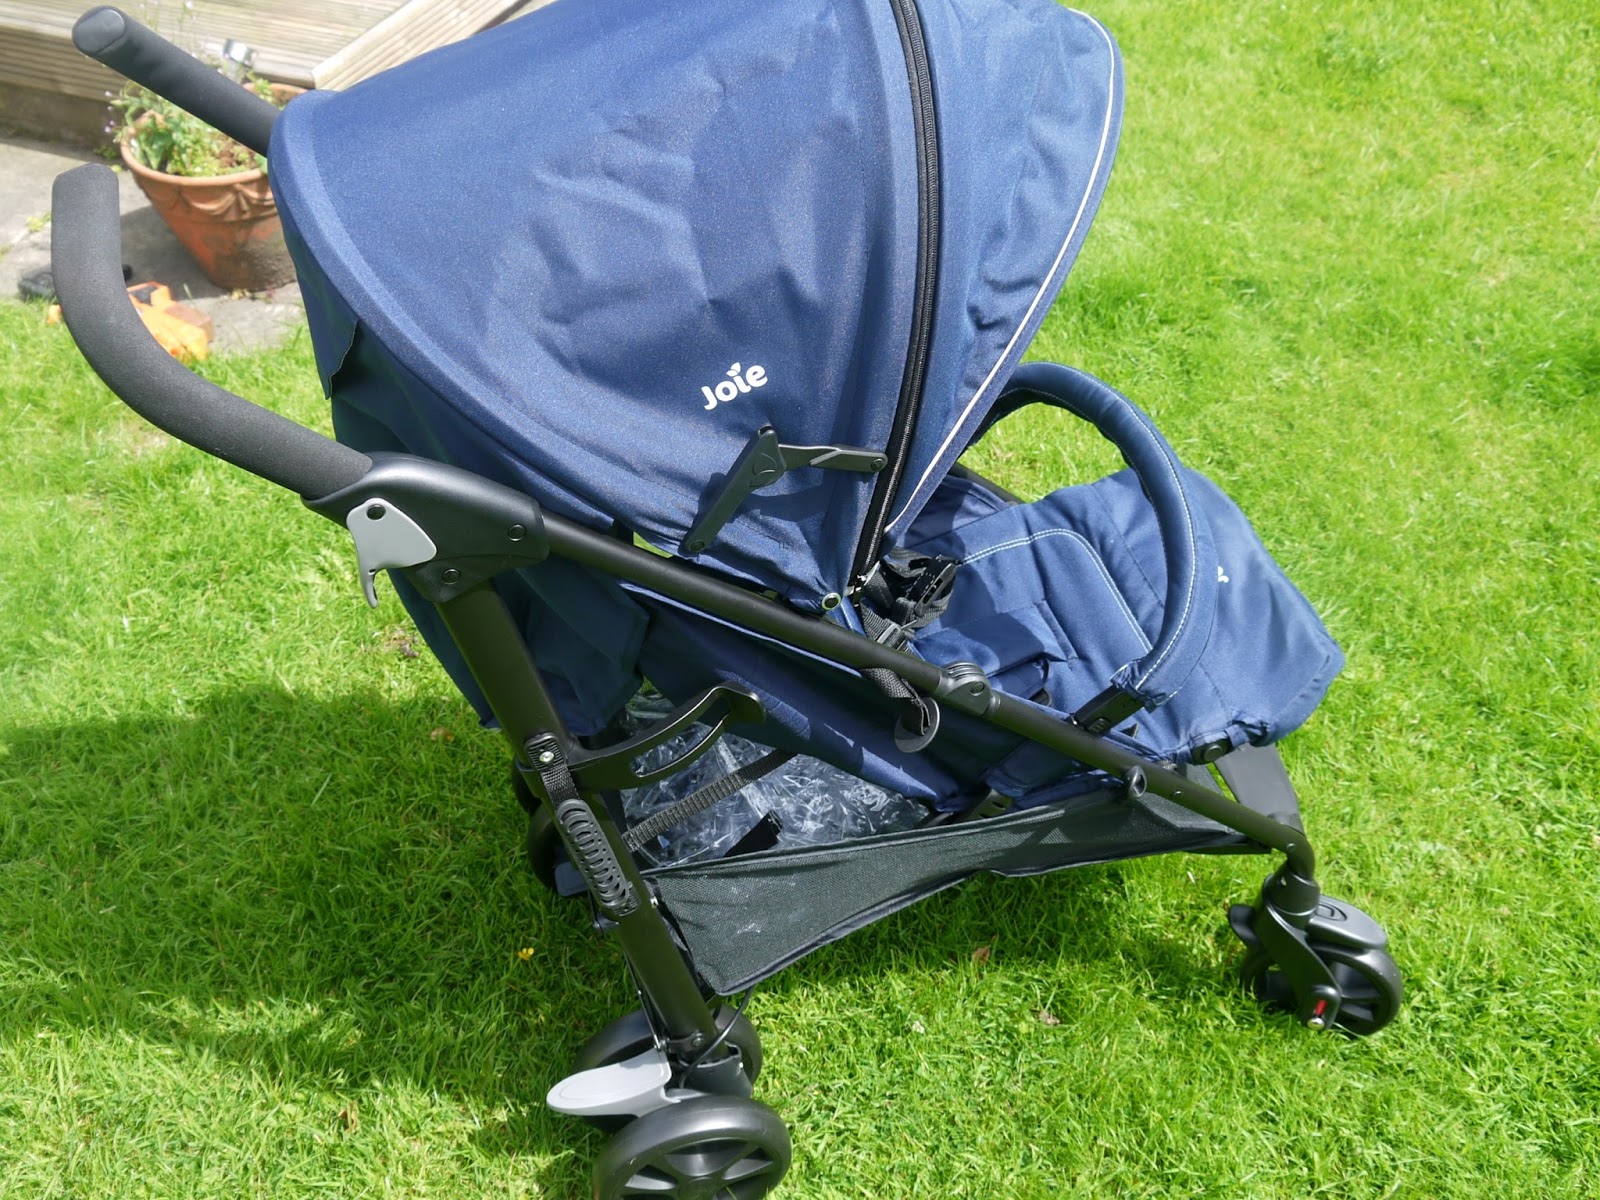 joie buggy brisk lx